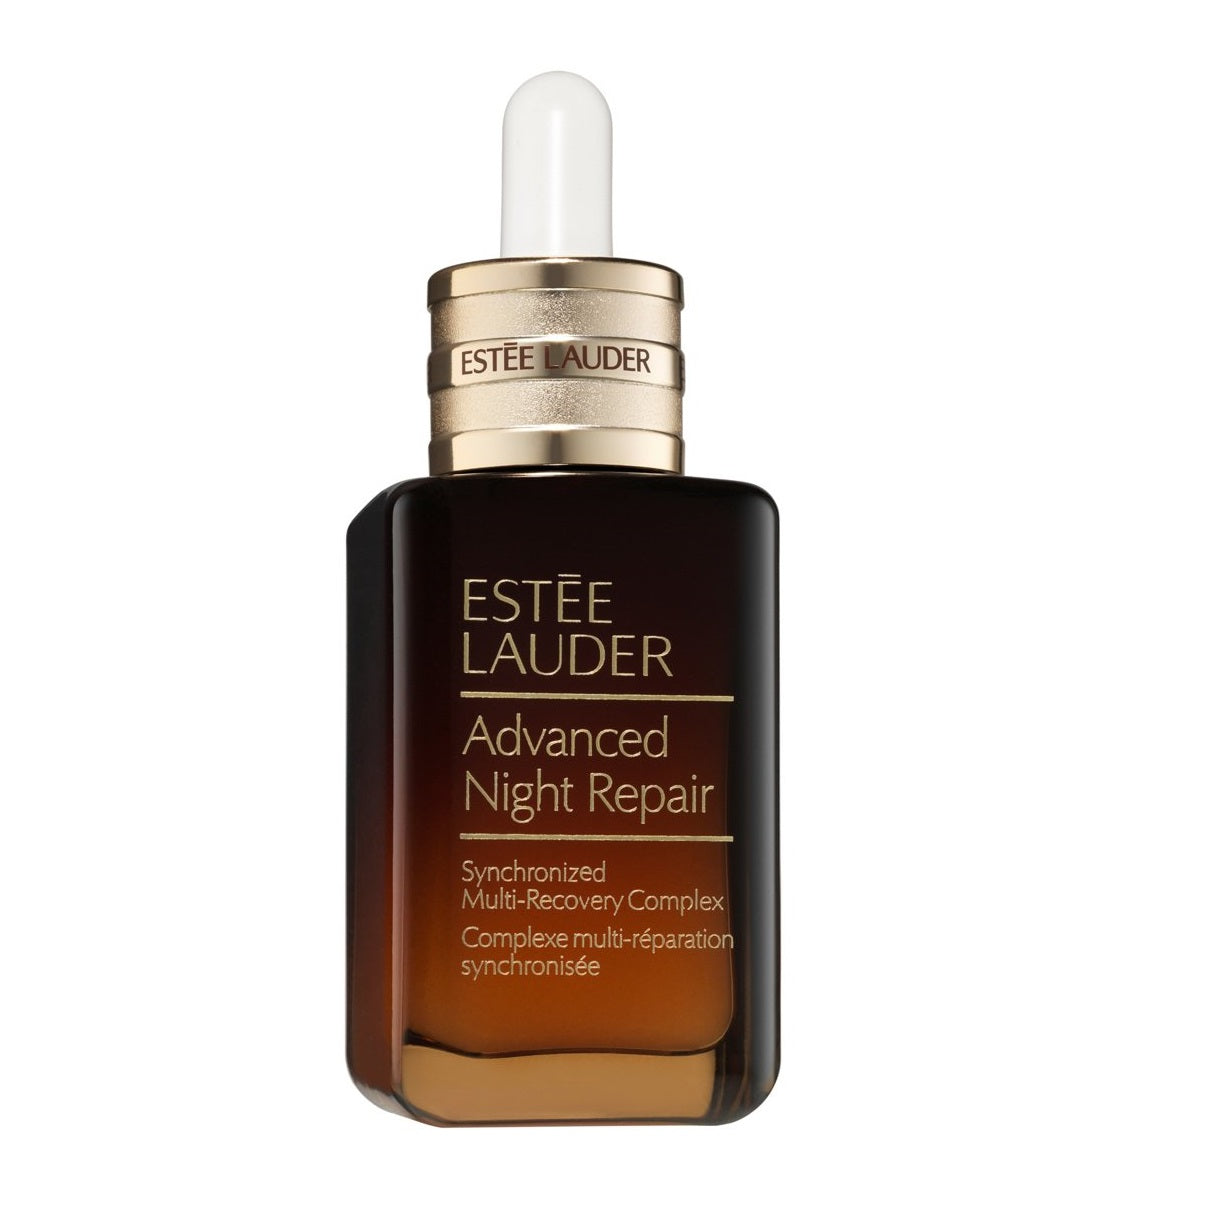 Estee Lauder Advanced Night Repair Synchronized Multi-Recovery Complex 50ml - Feel Gorgeous